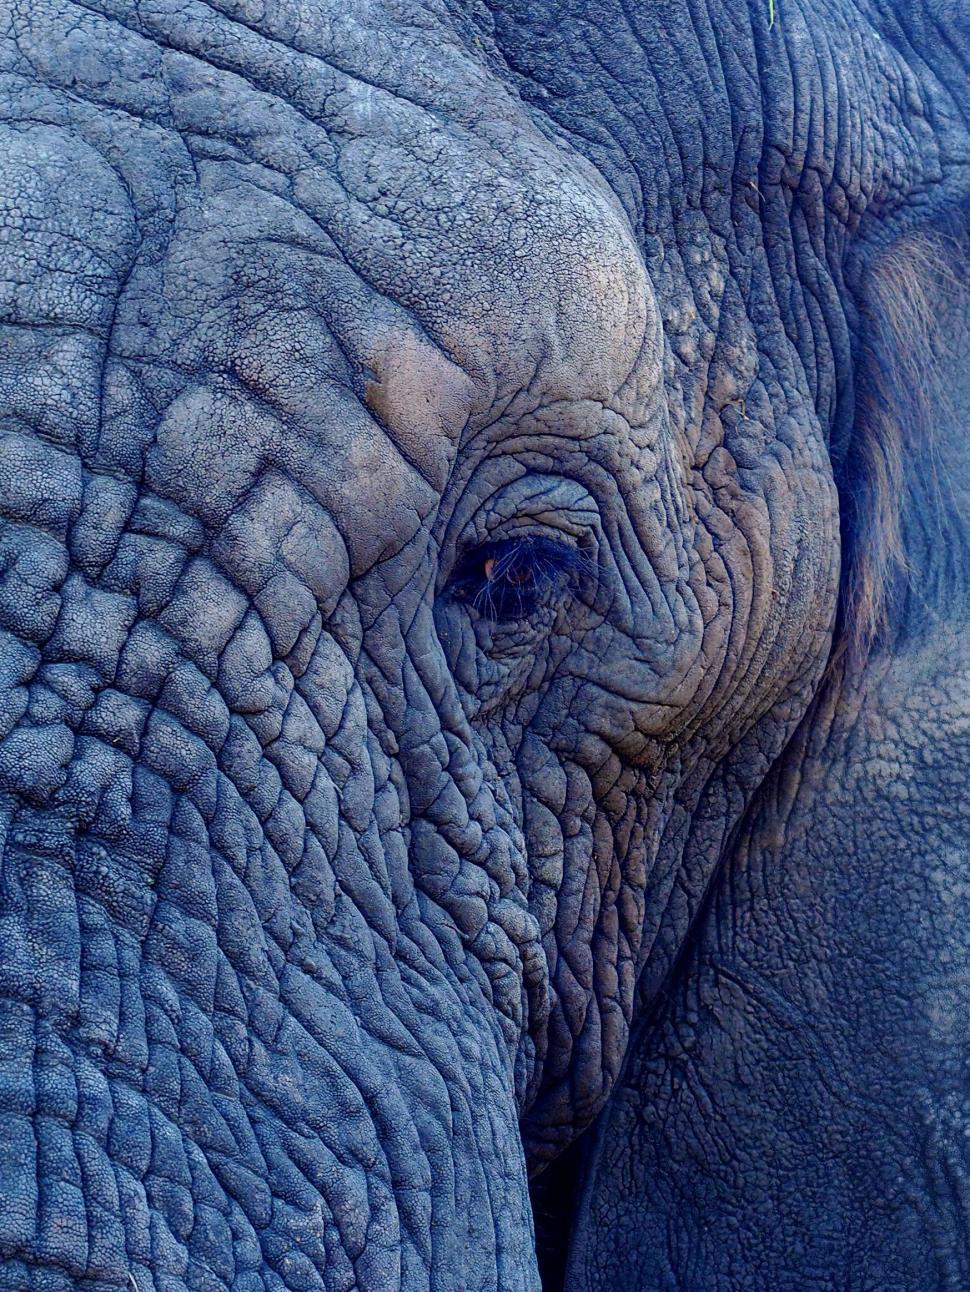 Free Image of Close Up View of an Elephants Face 